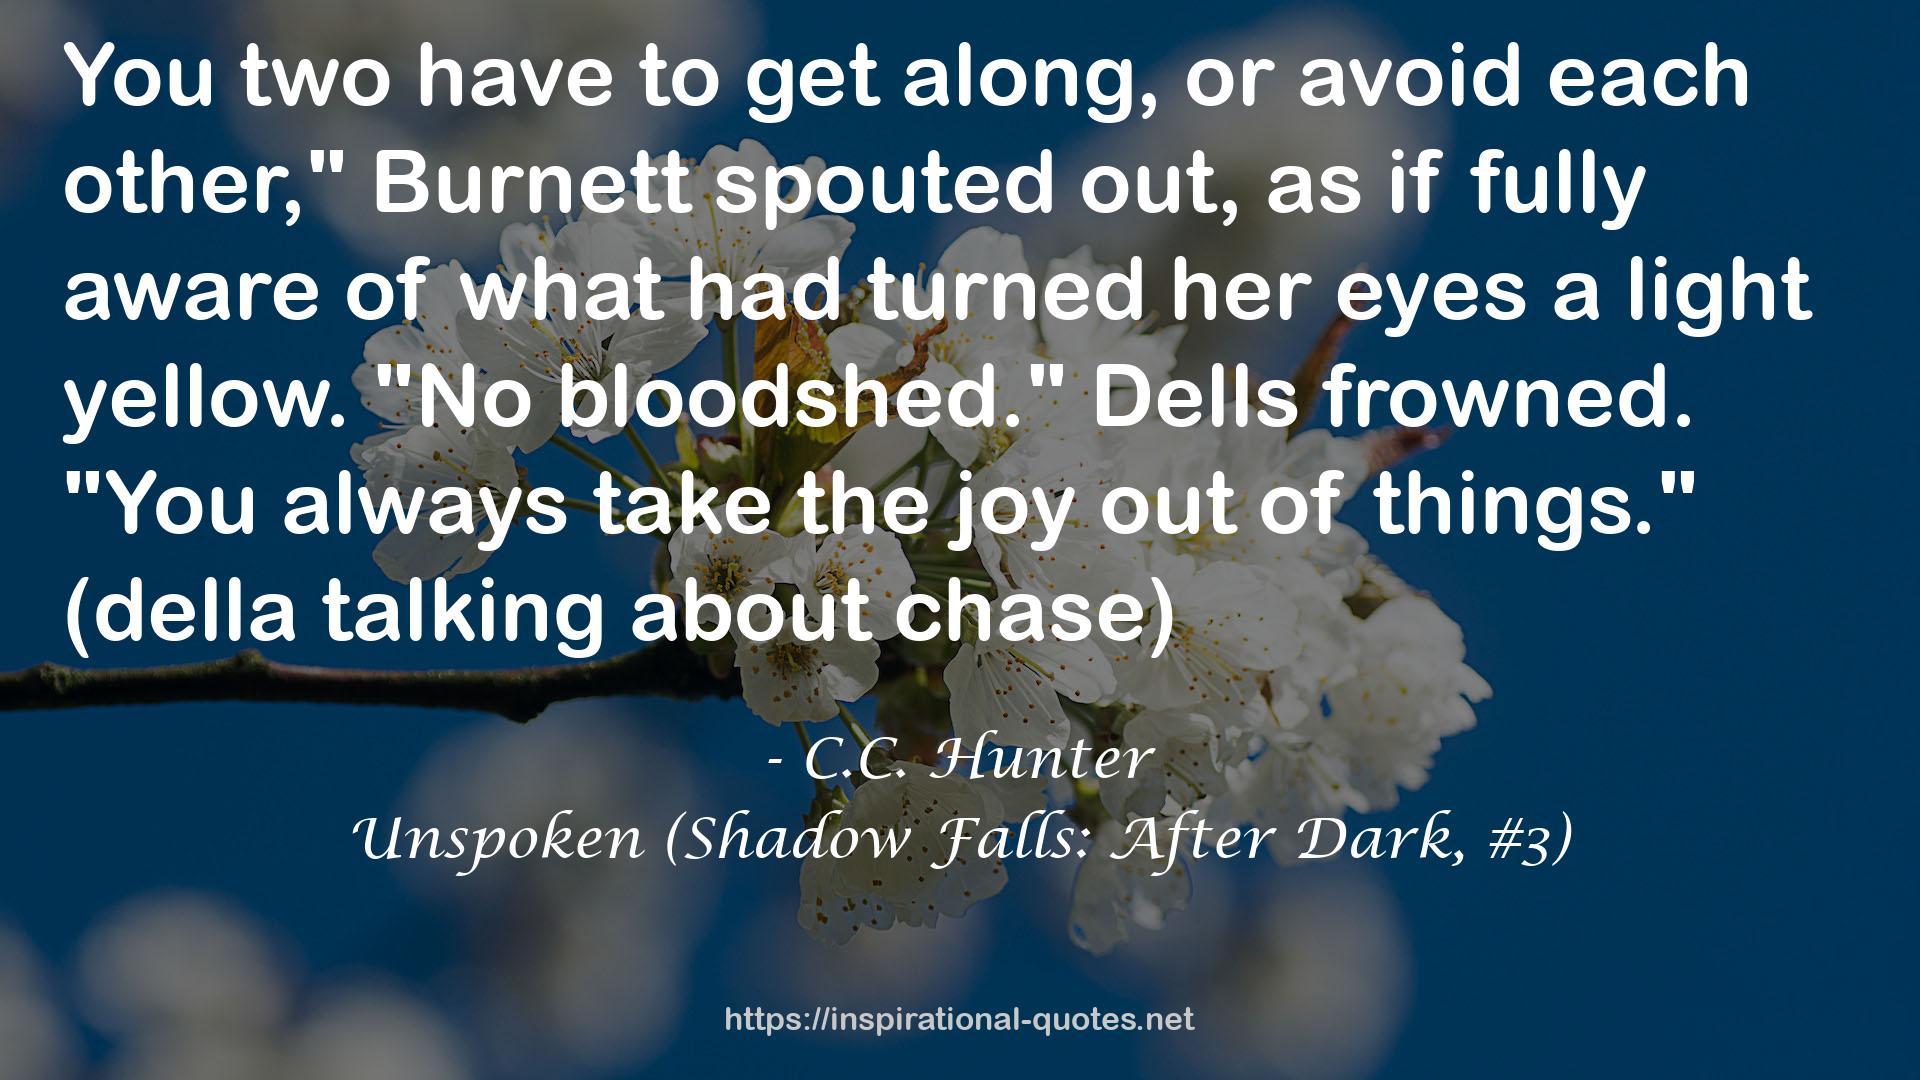 Unspoken (Shadow Falls: After Dark, #3) QUOTES